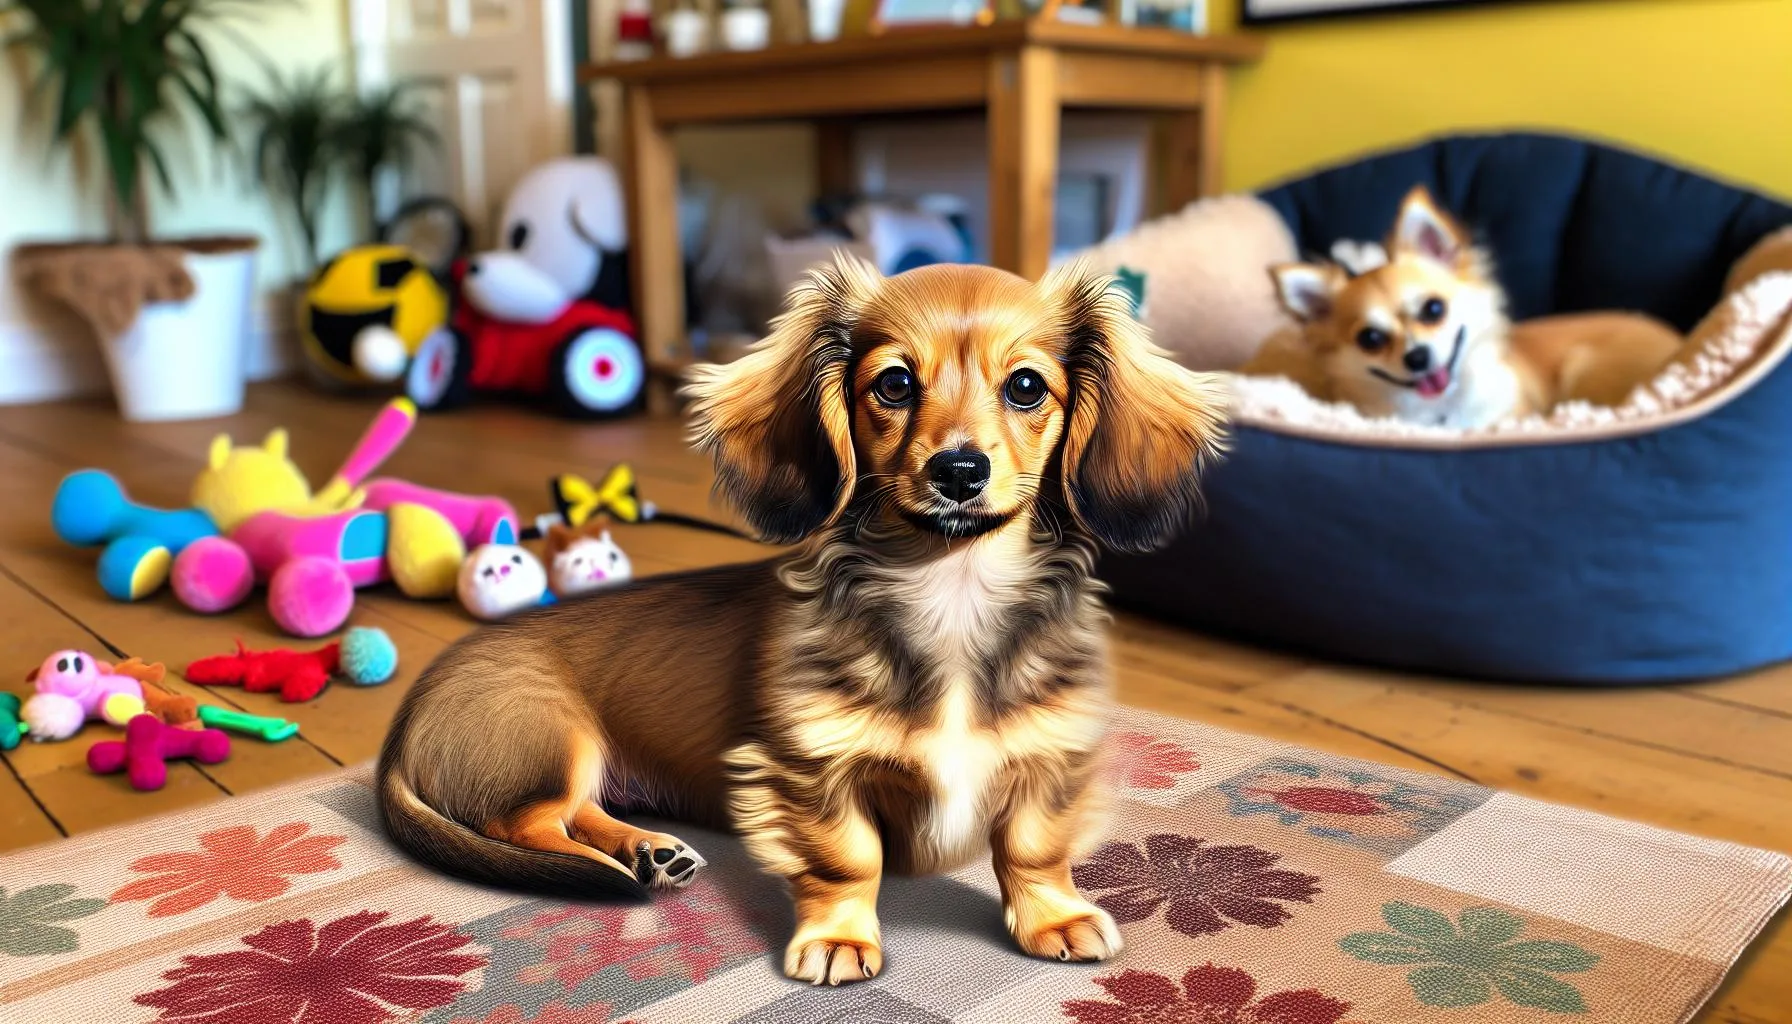 Discover the Dachshund long haired chihuahua mix!